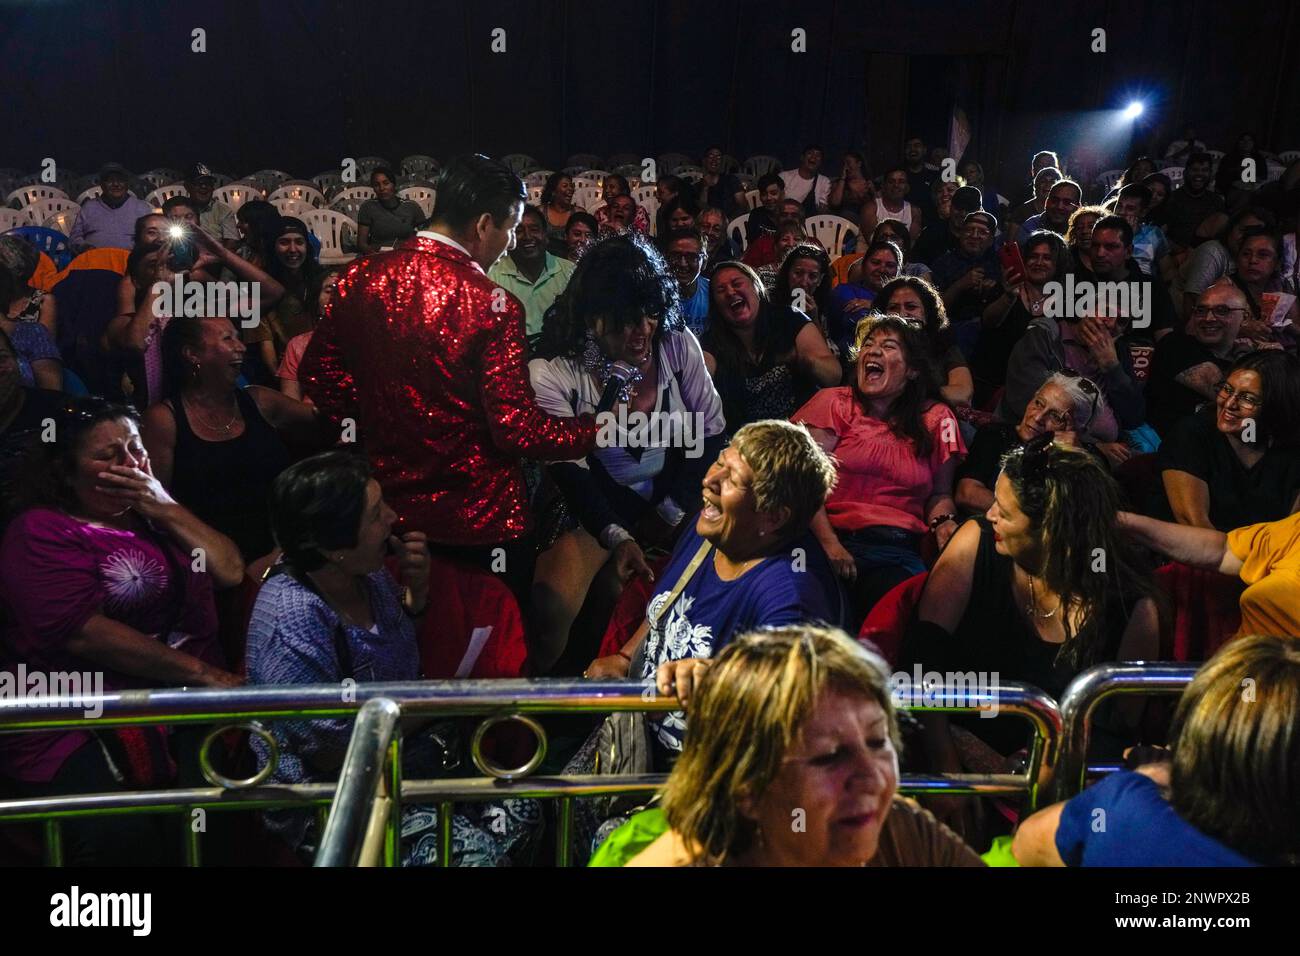 Audience members bust out laughing as Arturo Peña in his role as "La loca  de la cartera", or “The Crazy Purse Lady,” engages with the public during a  Timoteo Circus show, on